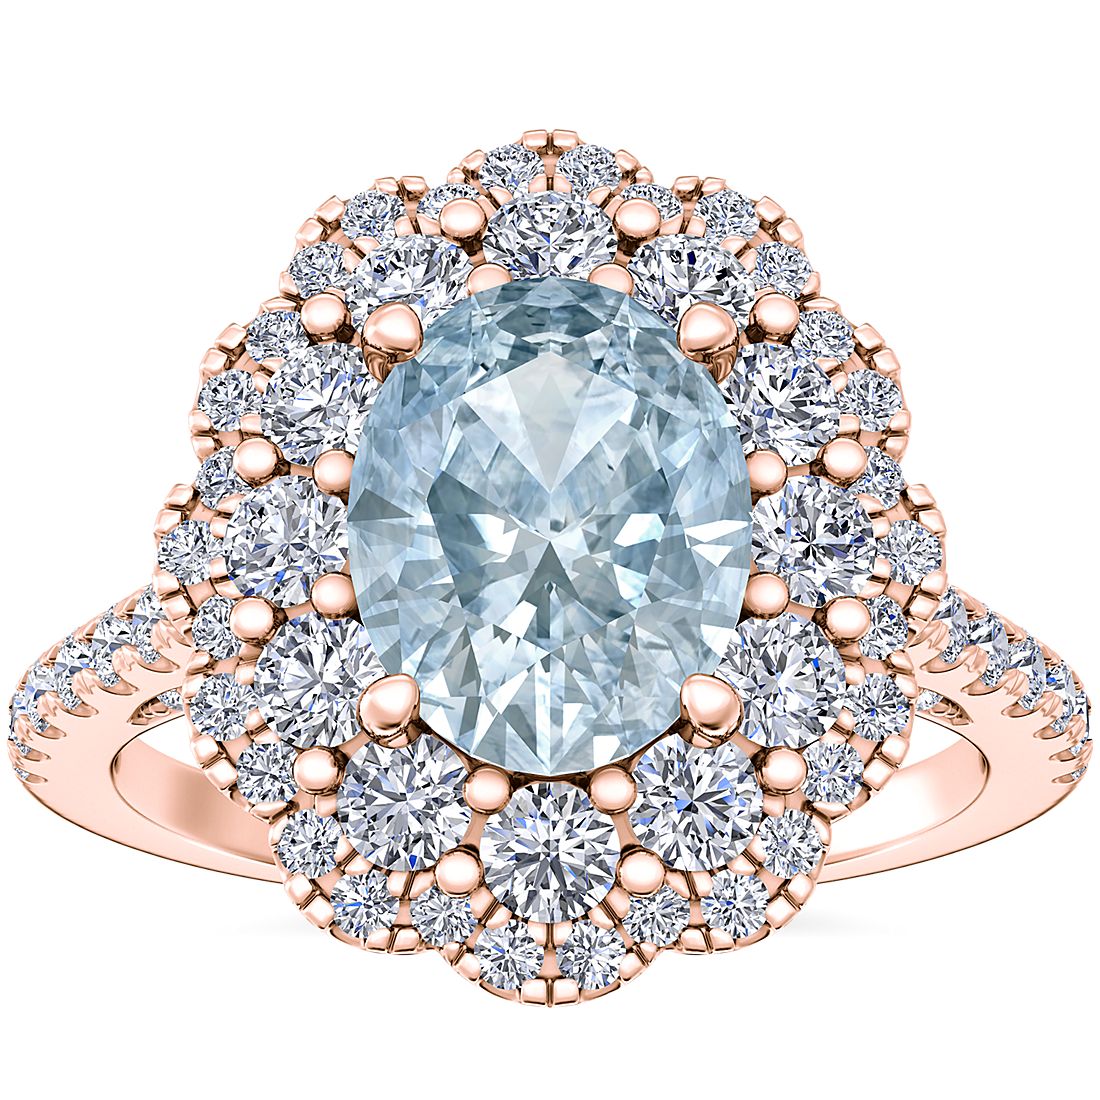 Vintage Diamond Halo Engagement Ring with Oval Aquamarine in 14k Rose Gold (9x7mm)